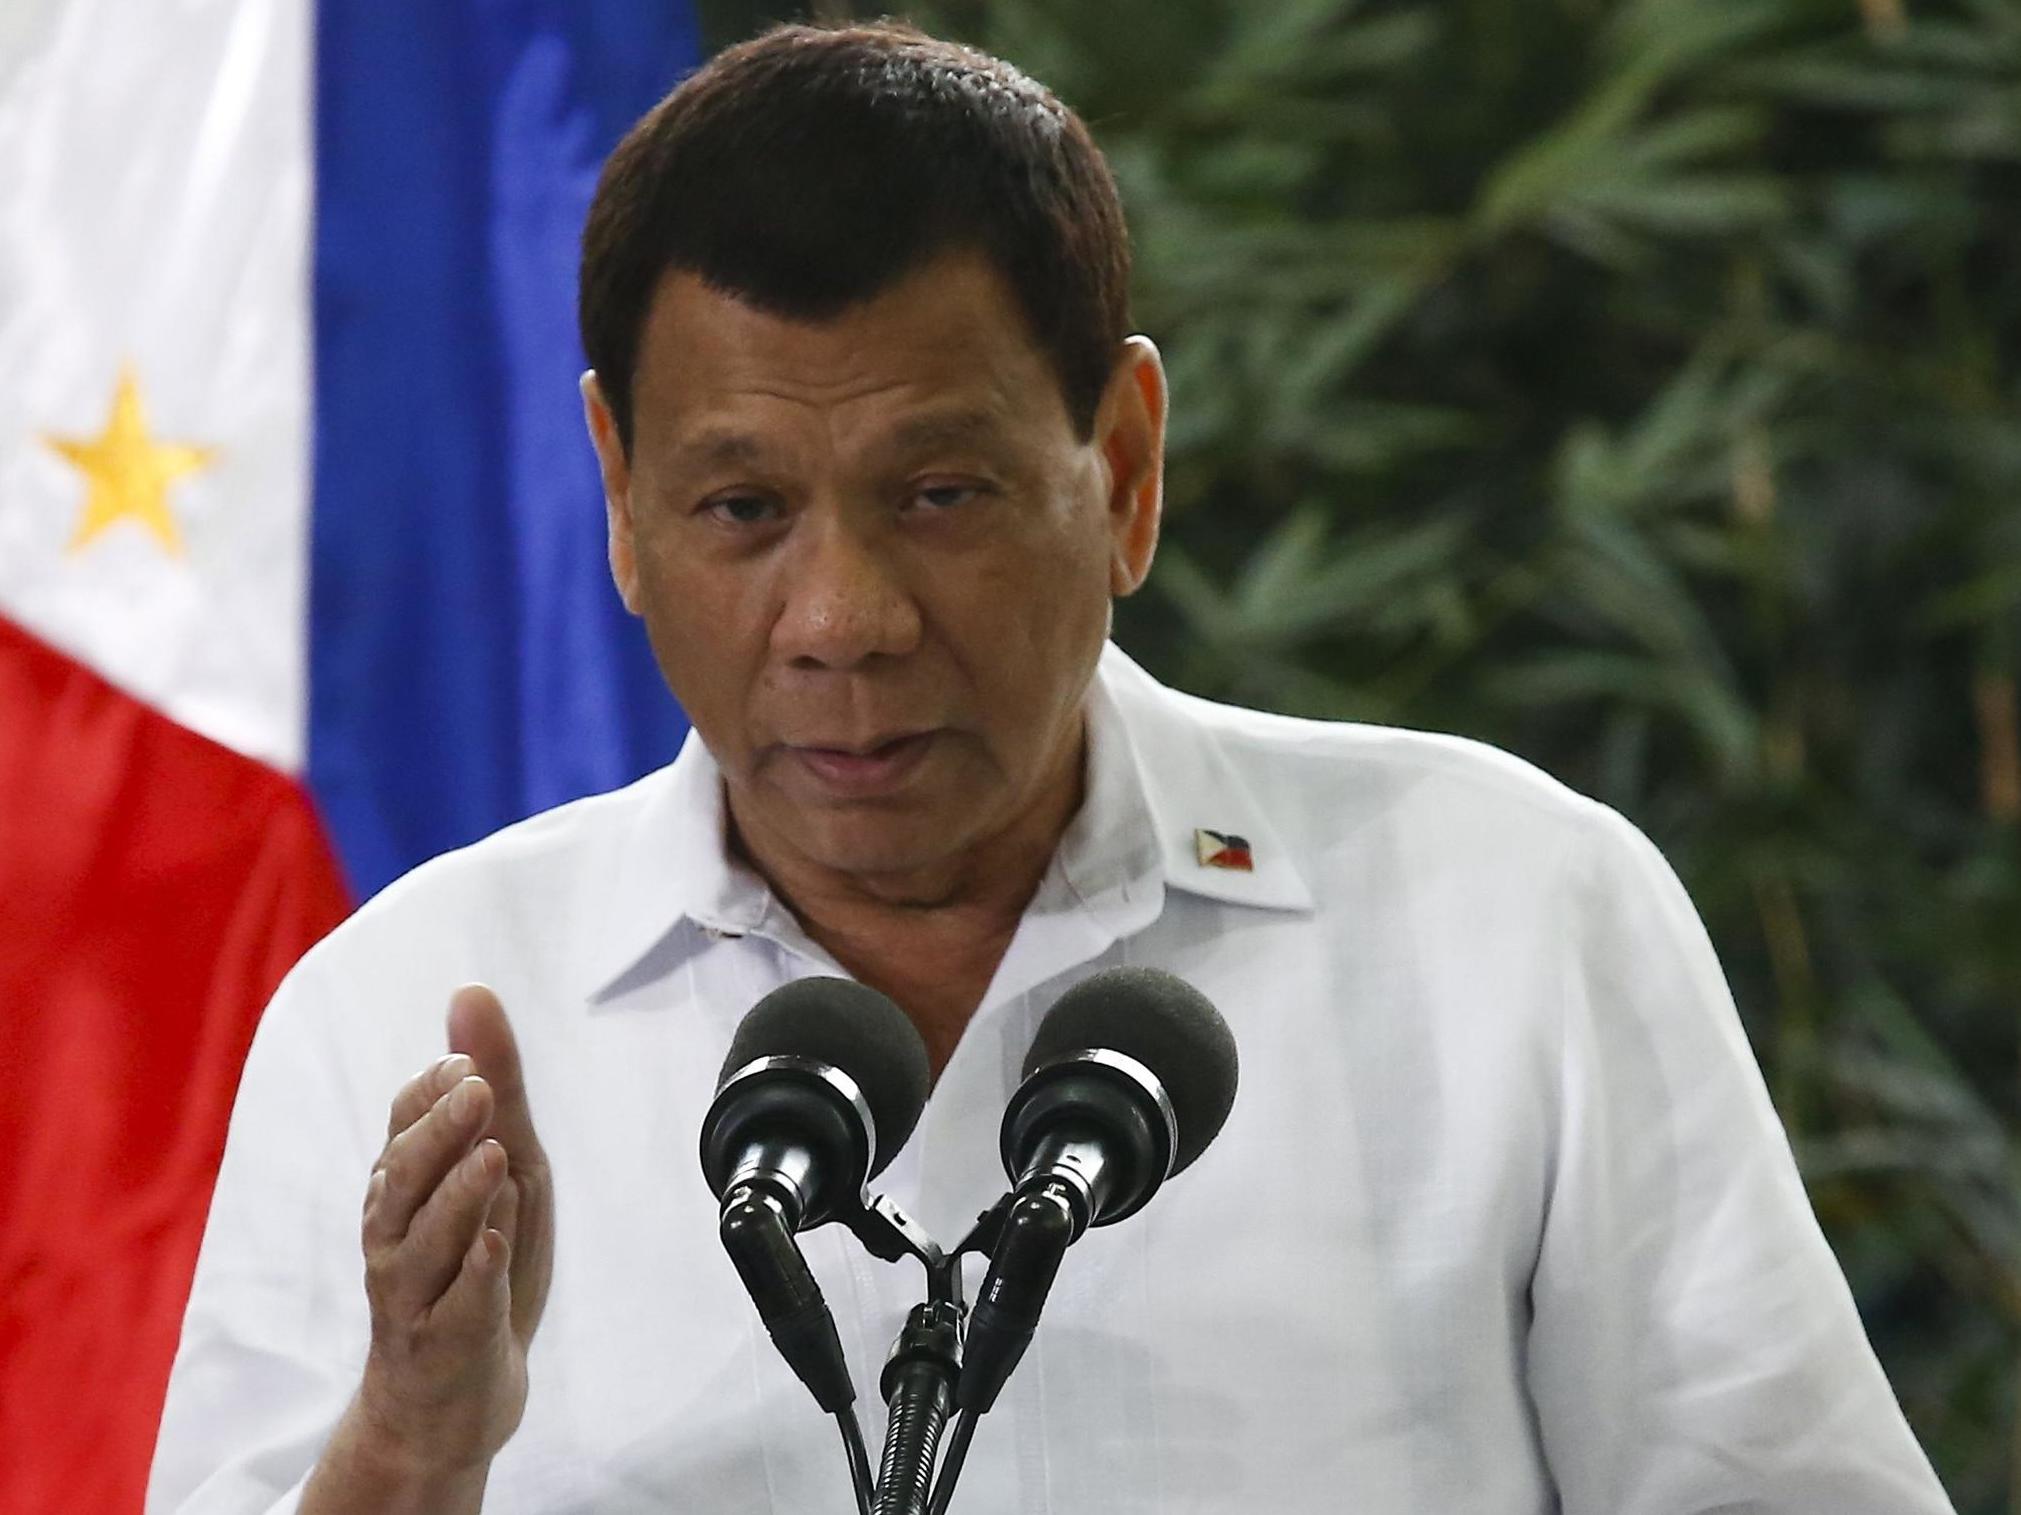 Rodrigo Duterte has pulled his country out of the International Criminal Court